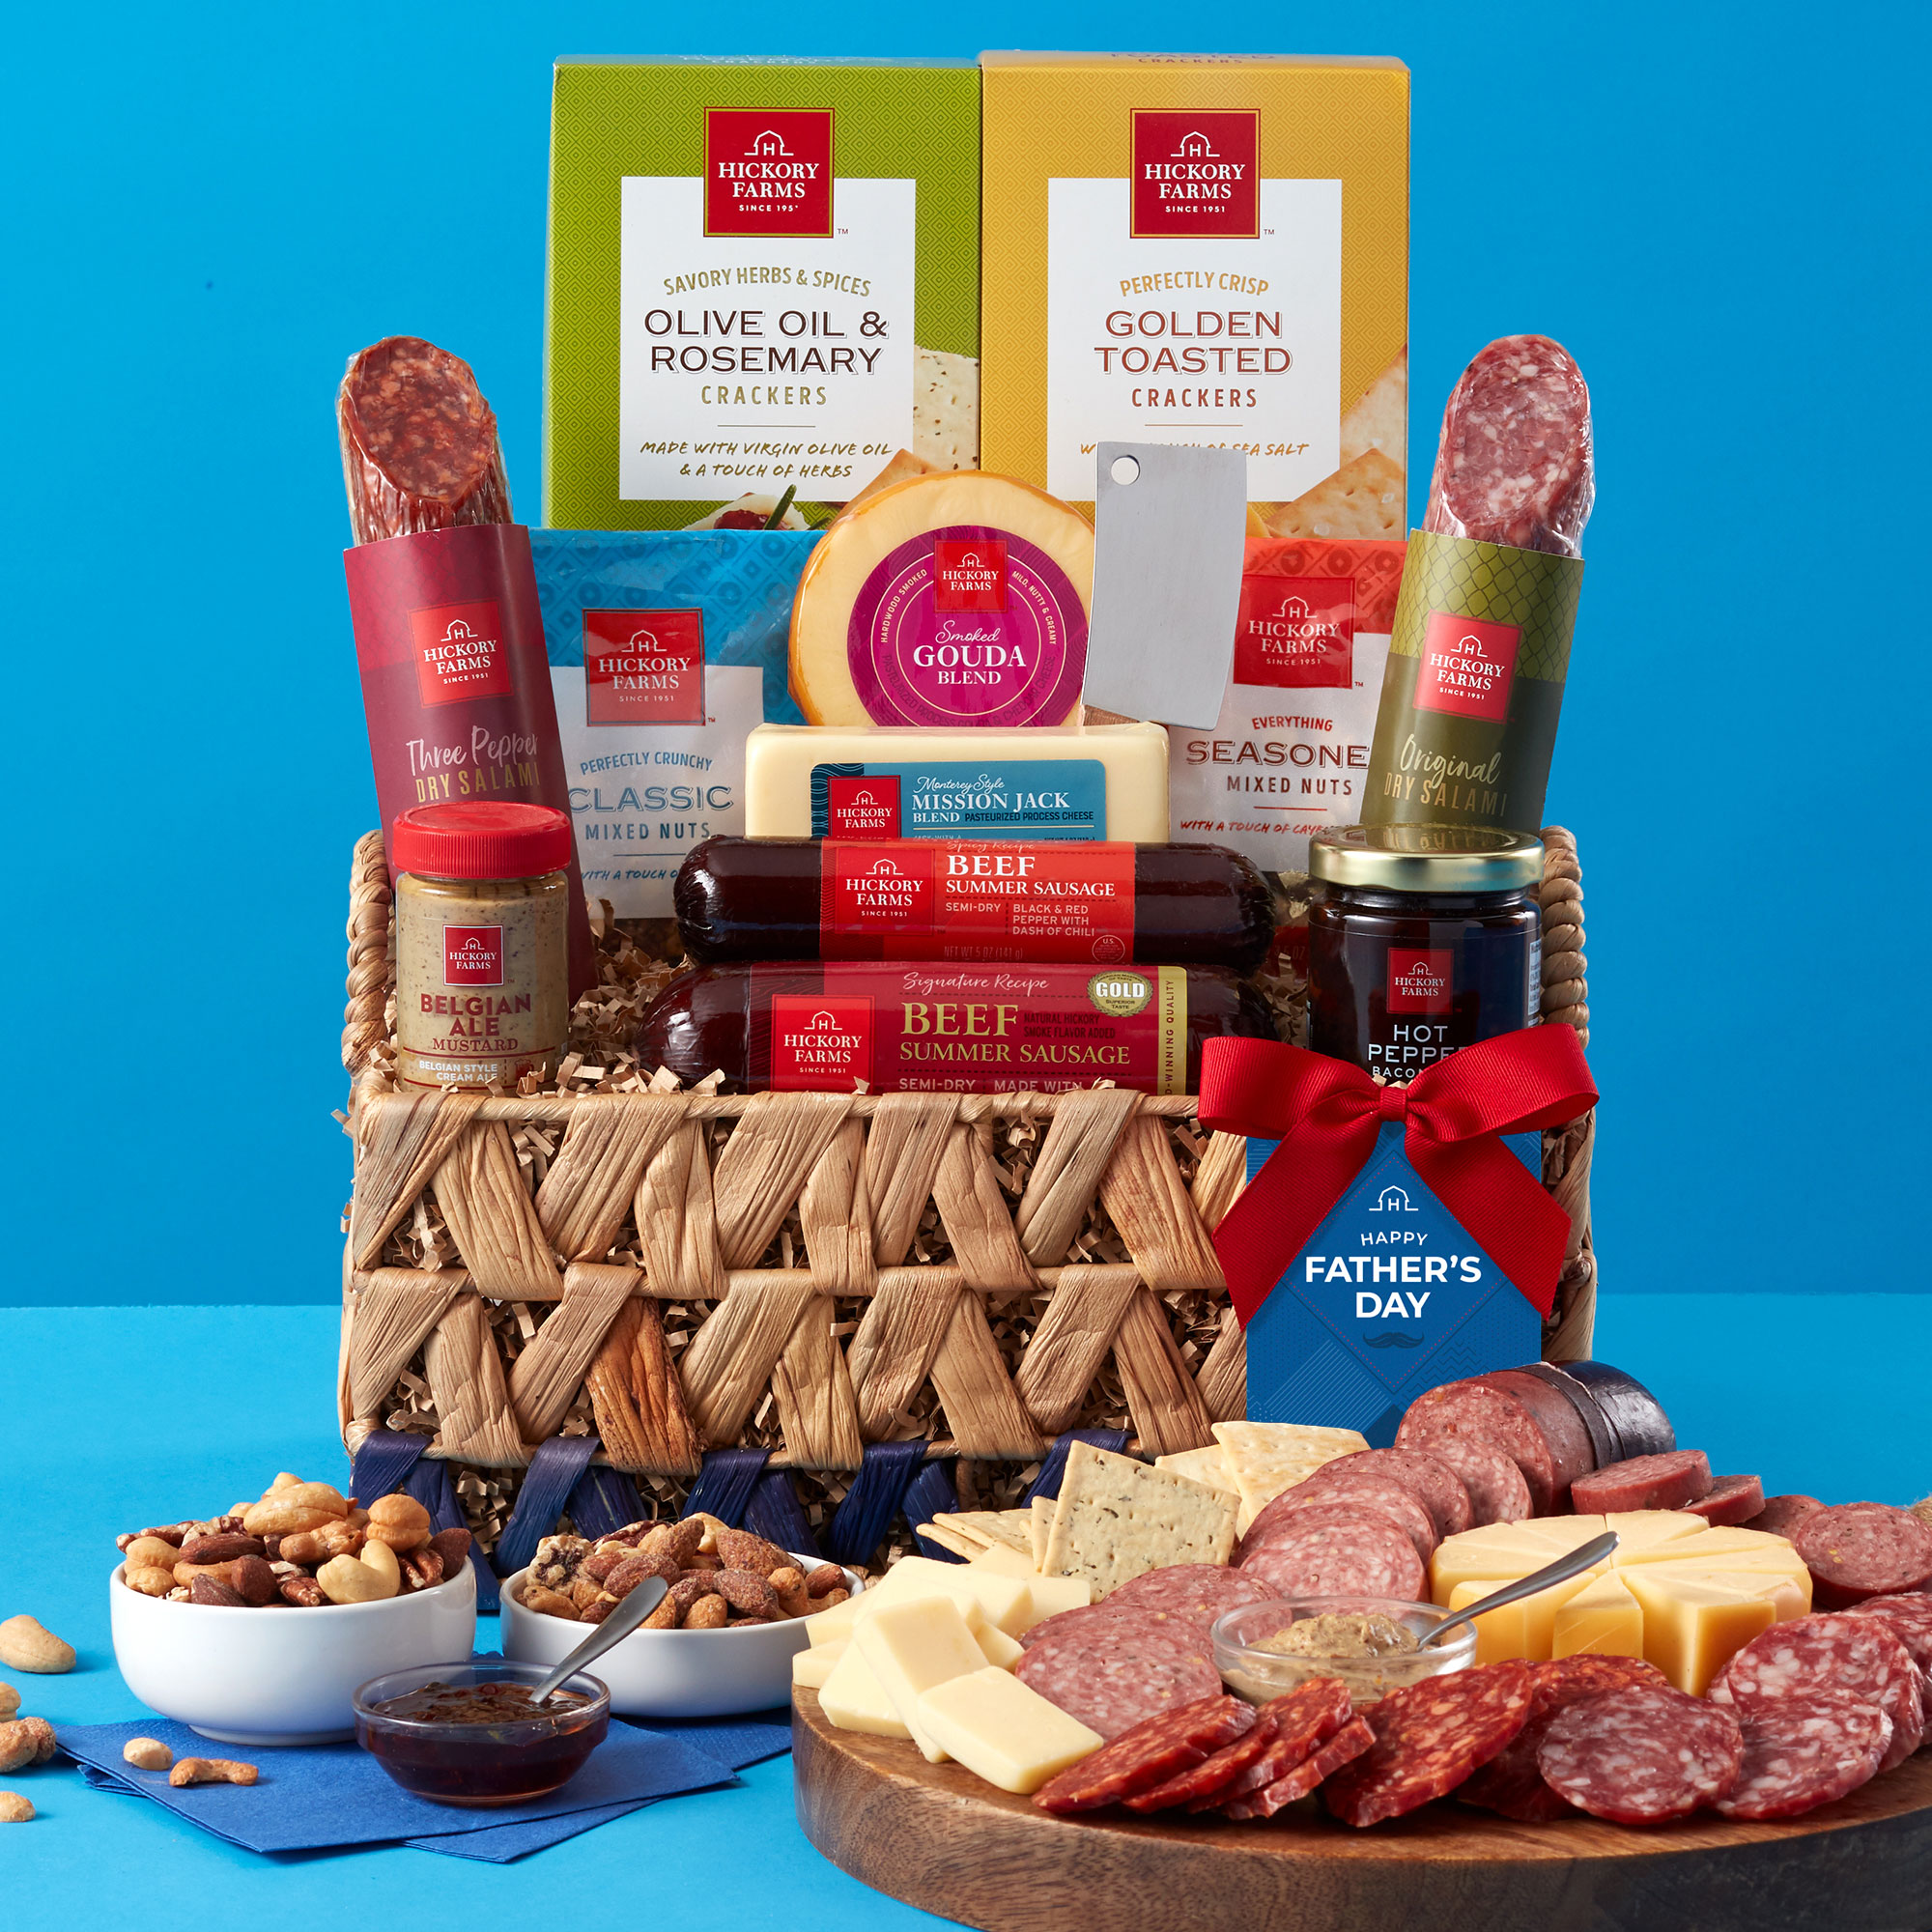 Cheese & Sausage Gift Box | Sausage & Cheese All-Time Favorites Gift Box | Hickory Farms